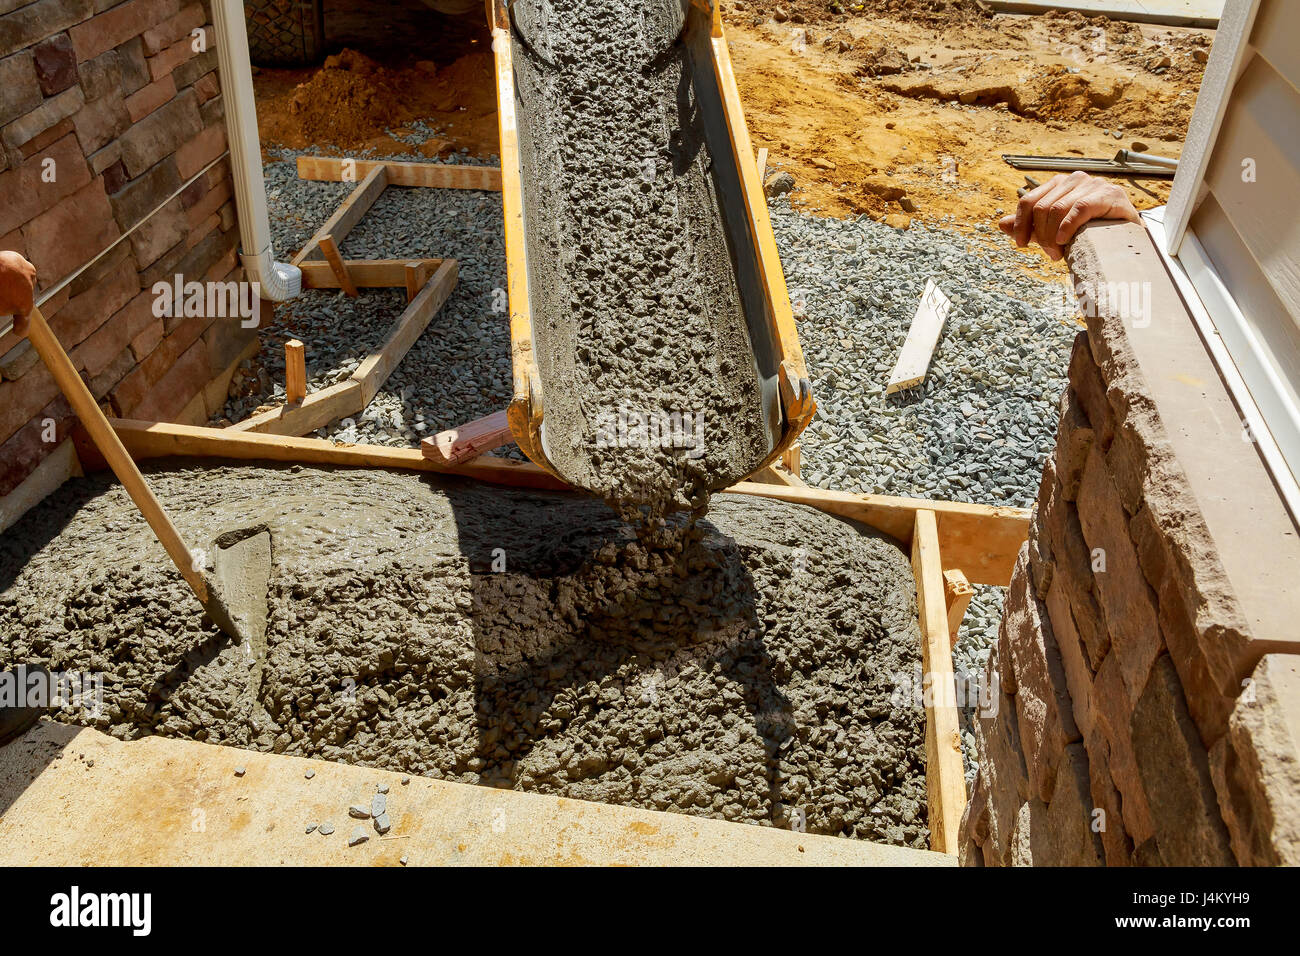 Concrete pouring during commercial concreting floors of building Stock Photo